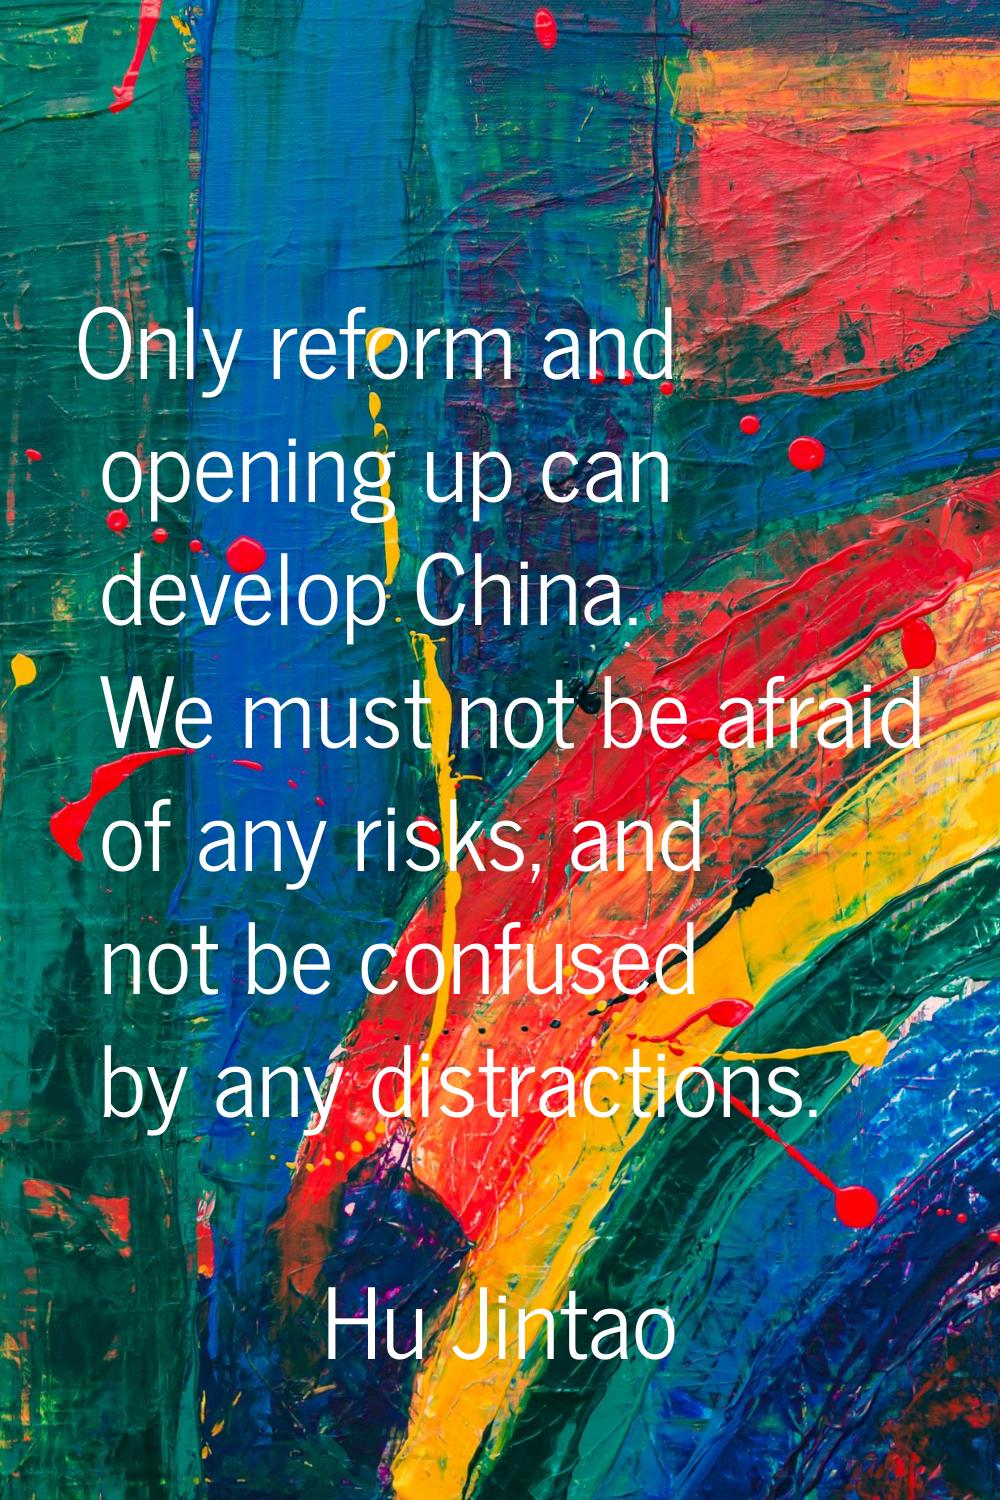 Only reform and opening up can develop China. We must not be afraid of any risks, and not be confus